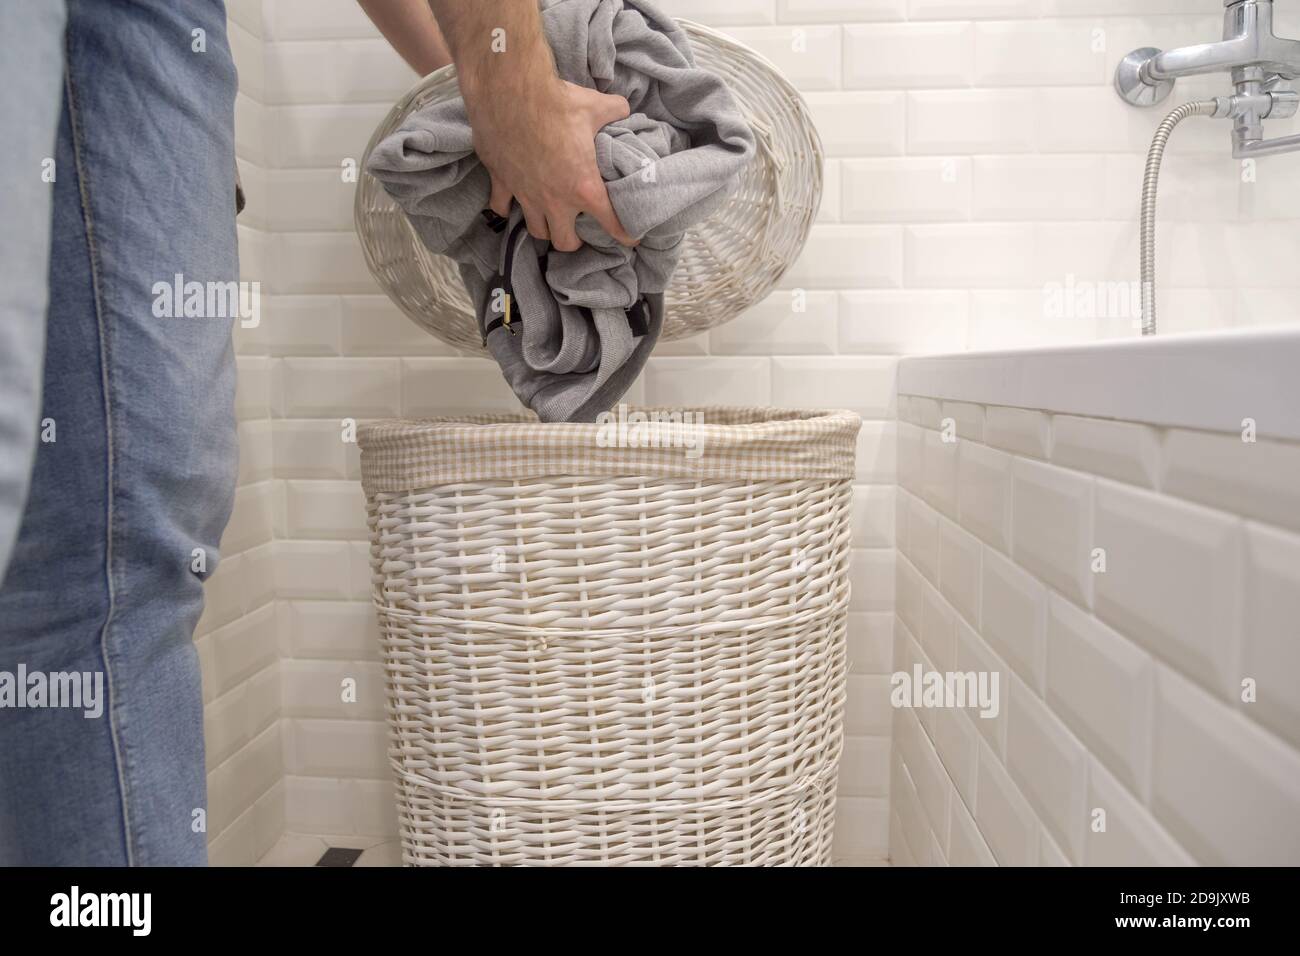 Man puts used dirty clothes in a dirty laundry basket. Stock Photo